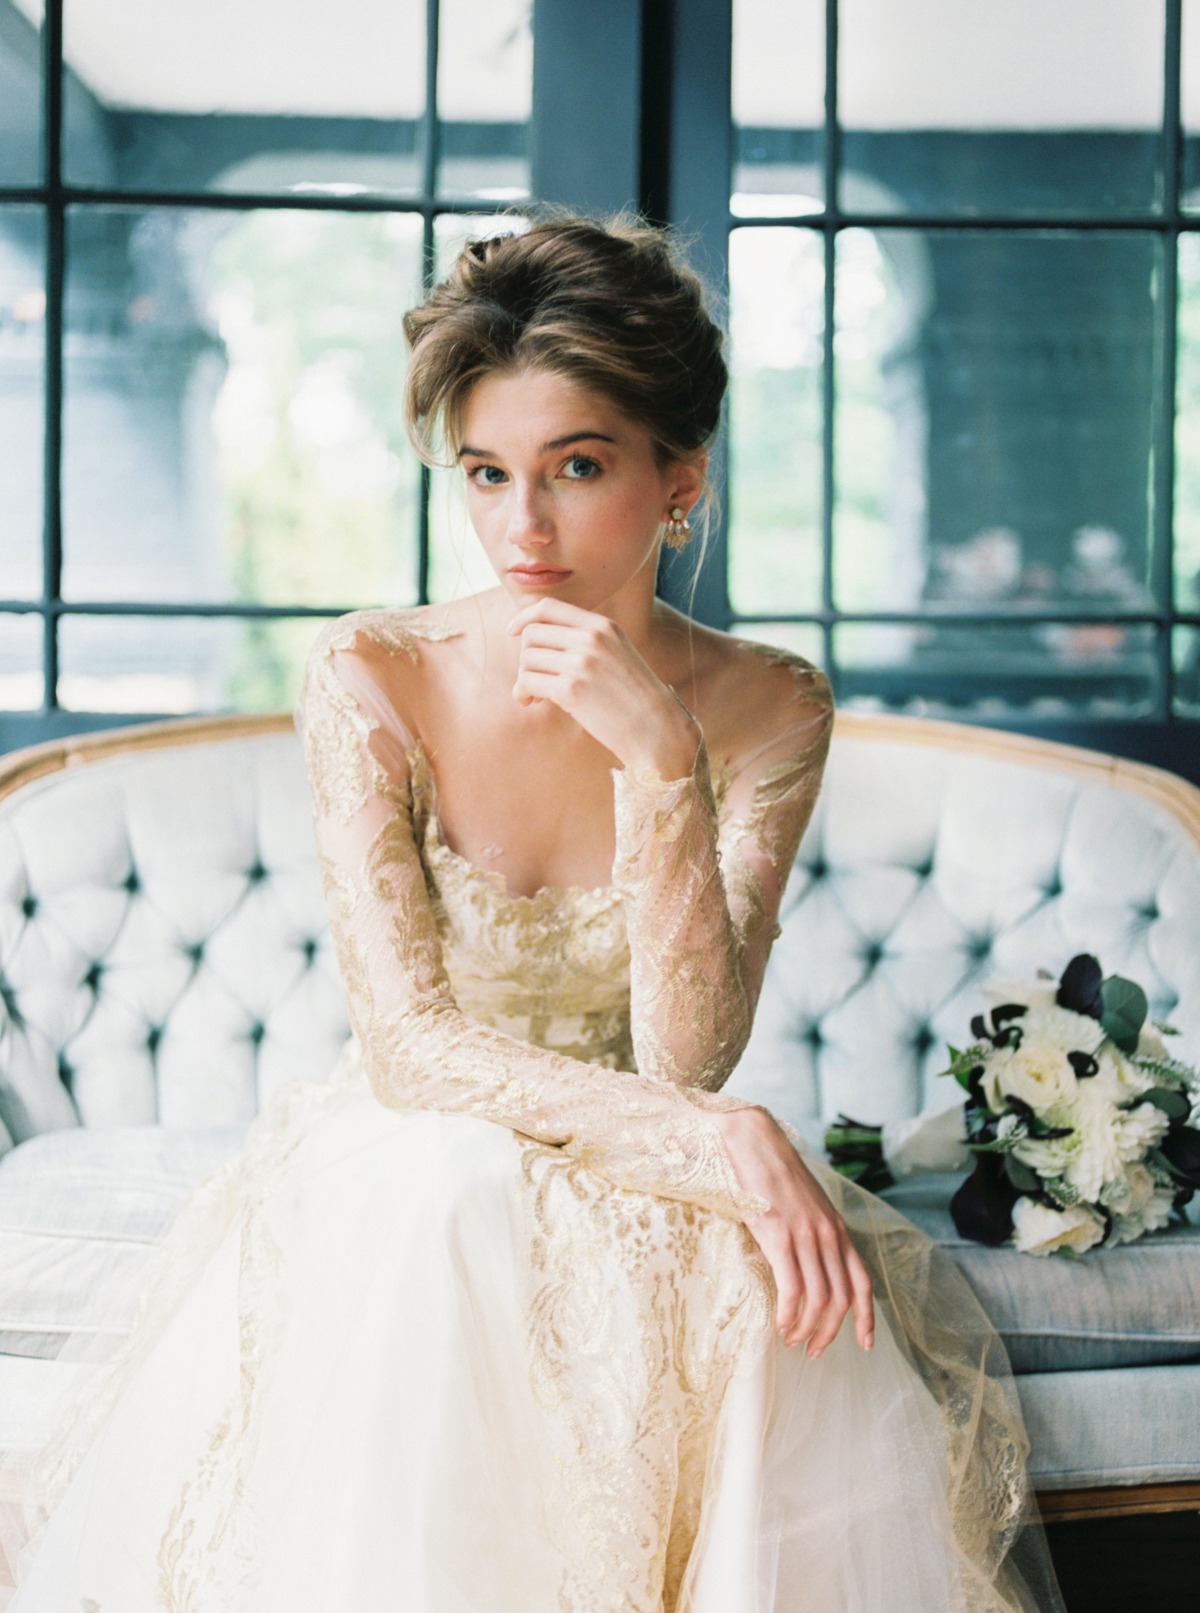 What To Wear When It's Not Your First Wedding